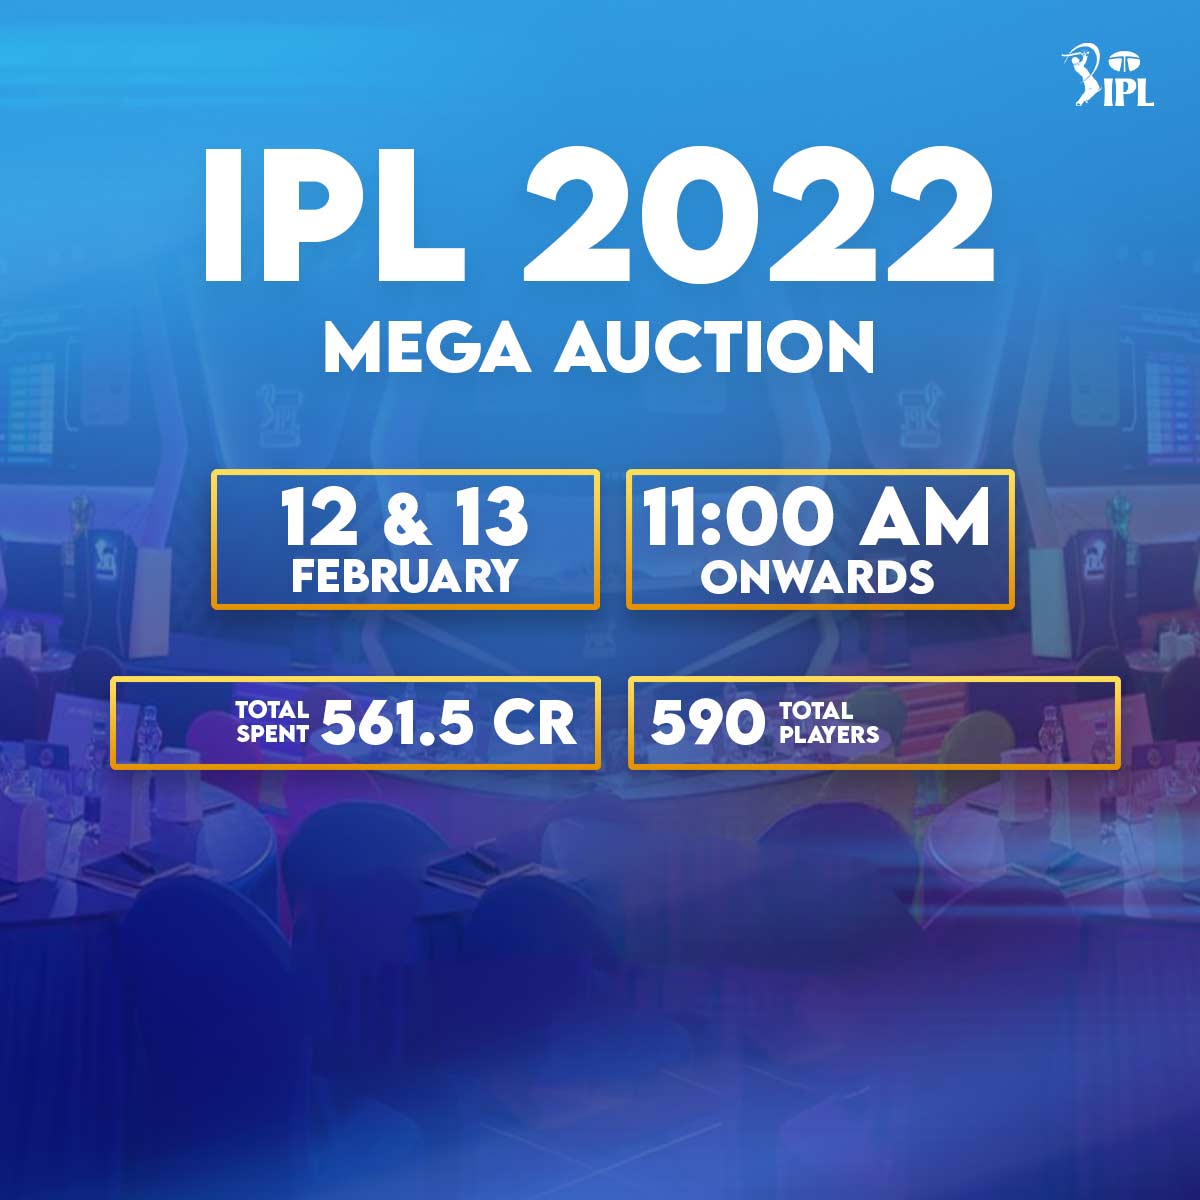 IPL 2022 Auction Live Updates on Sold, Unsold, and Remaining Purse Players, as well as Full Team Details, Day 1